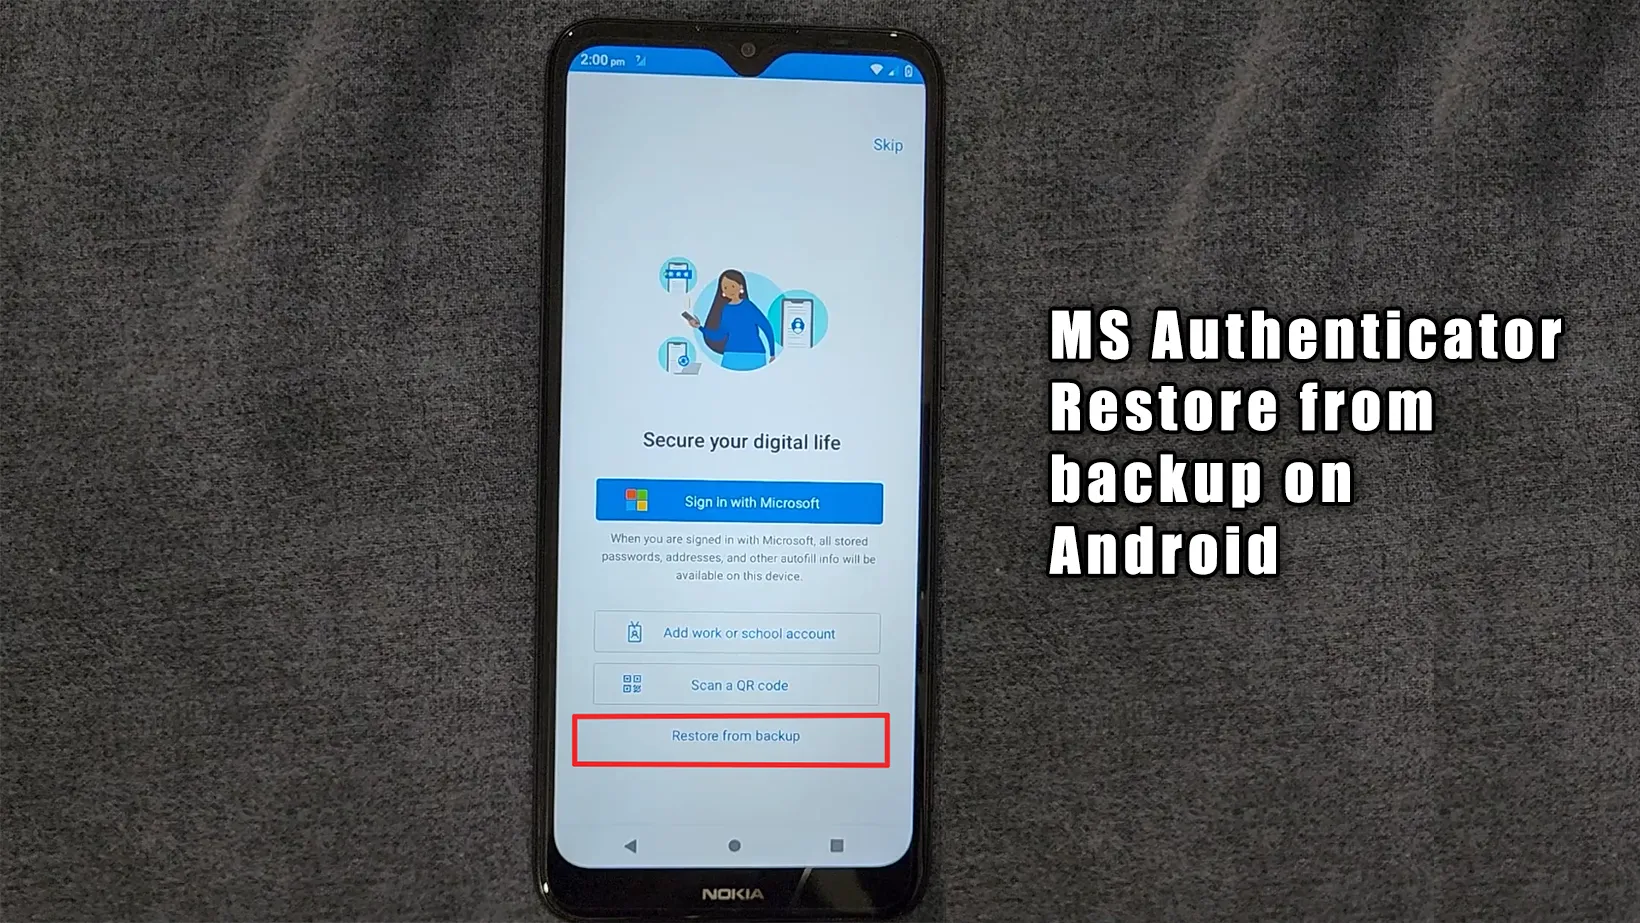 Microsoft Authenticator Restore from Backup on Android